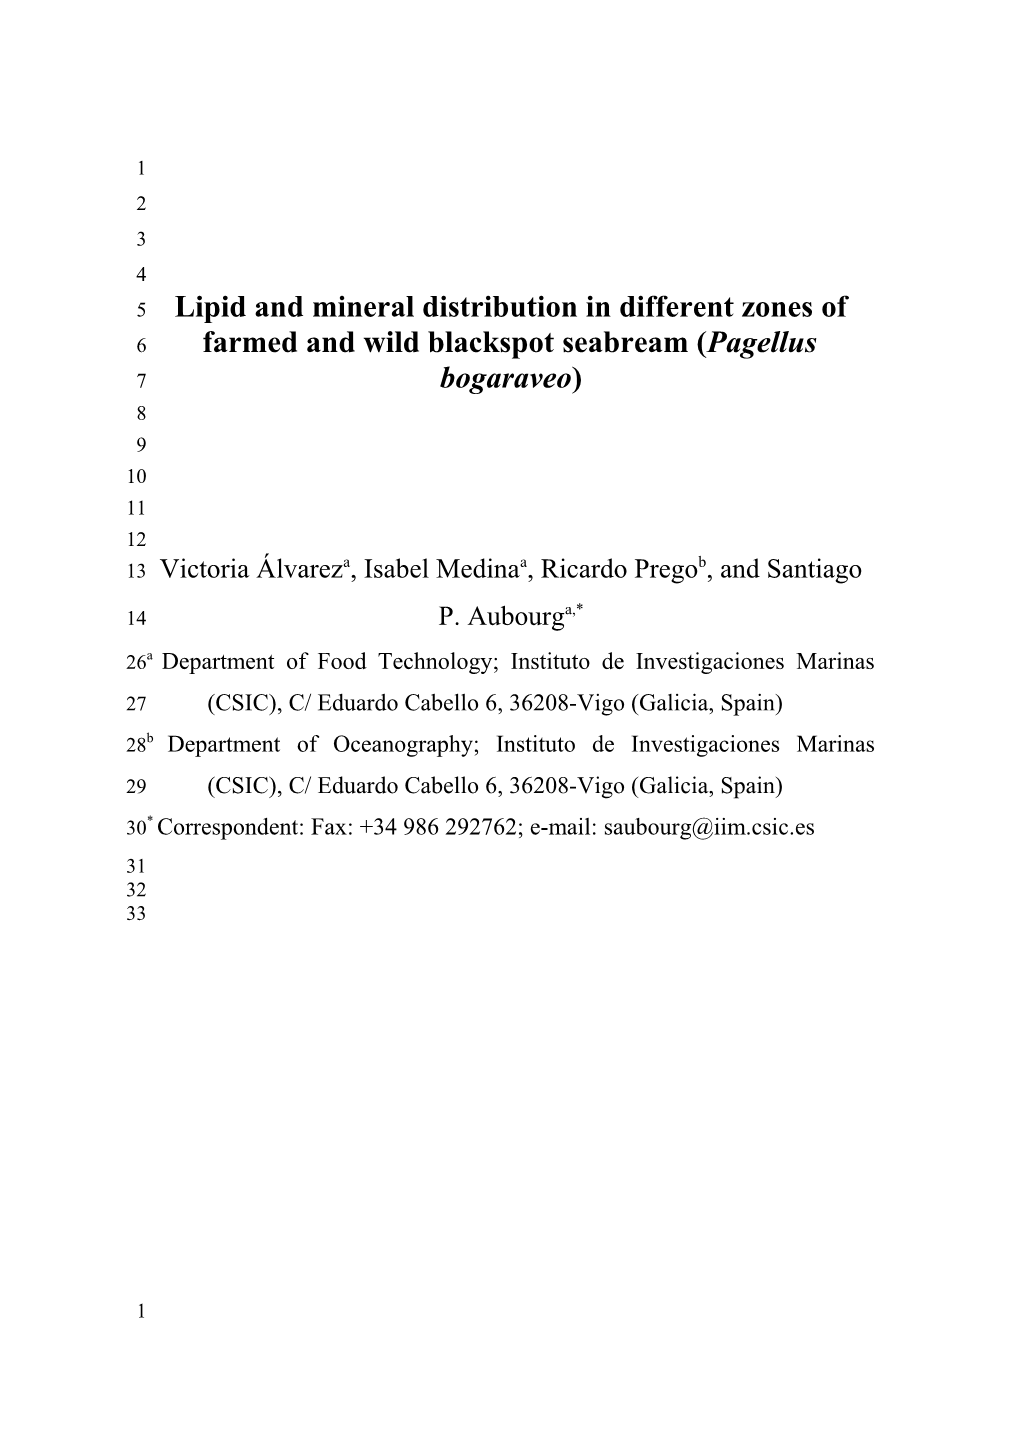 Lipid and Mineral Distribution in Different Zones of Farmed and Wild Blackspot Seabream